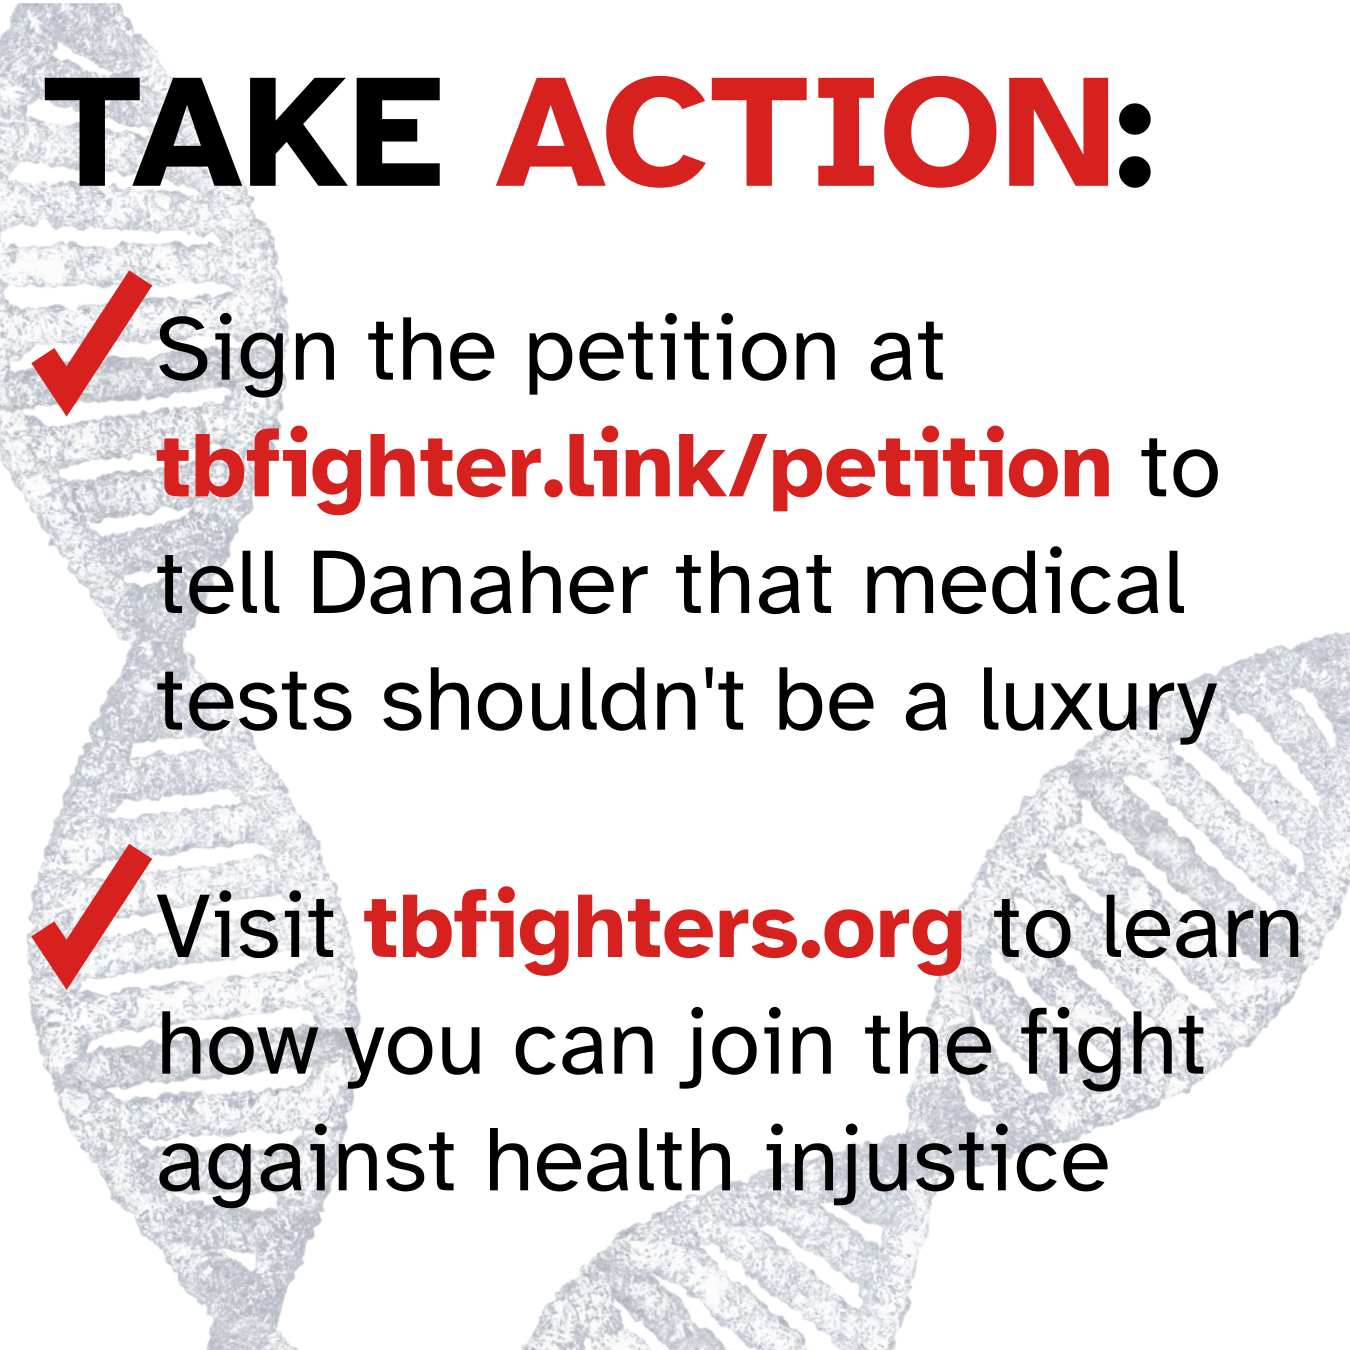 Take Action: Sign the petition at tbfighter.link/petition to tell Danaher that medical tests shouldn’t be a luxury. Visit tbfighters.org to learn how you can fight against health injustice.